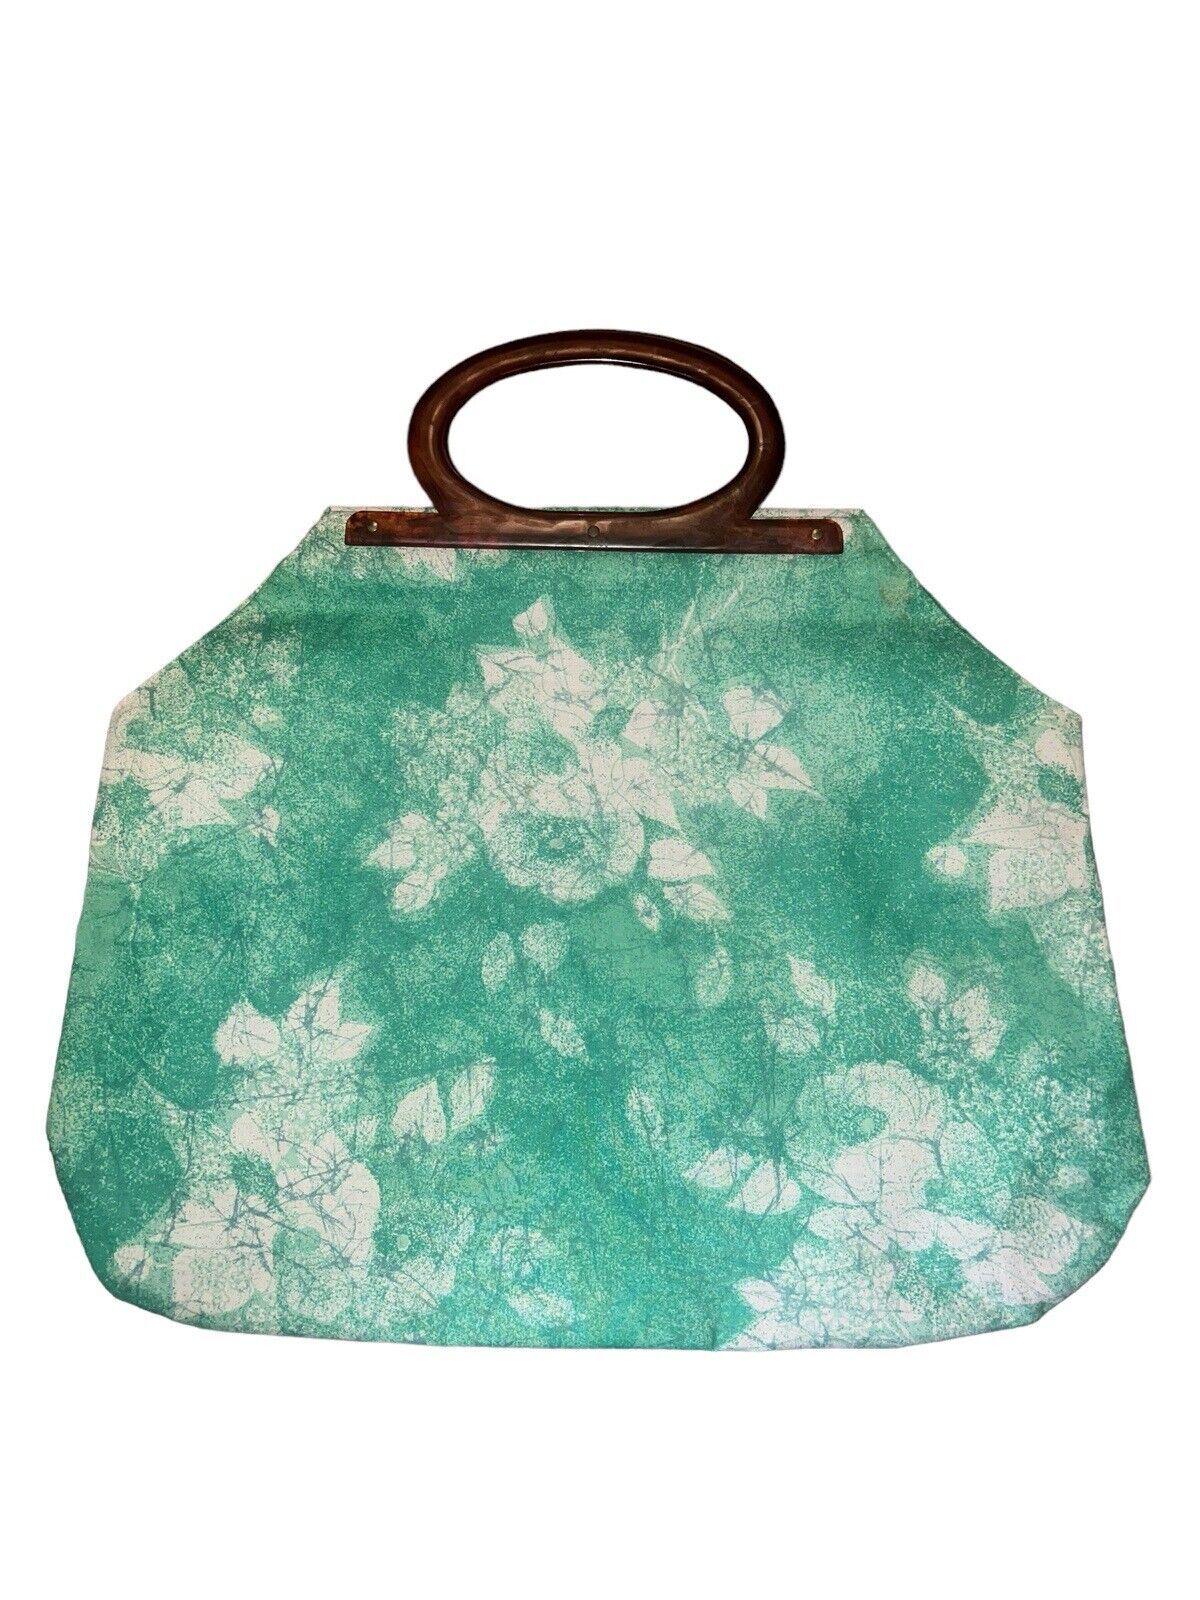 Vintage Green/white Floral Shopping Tote - image 2